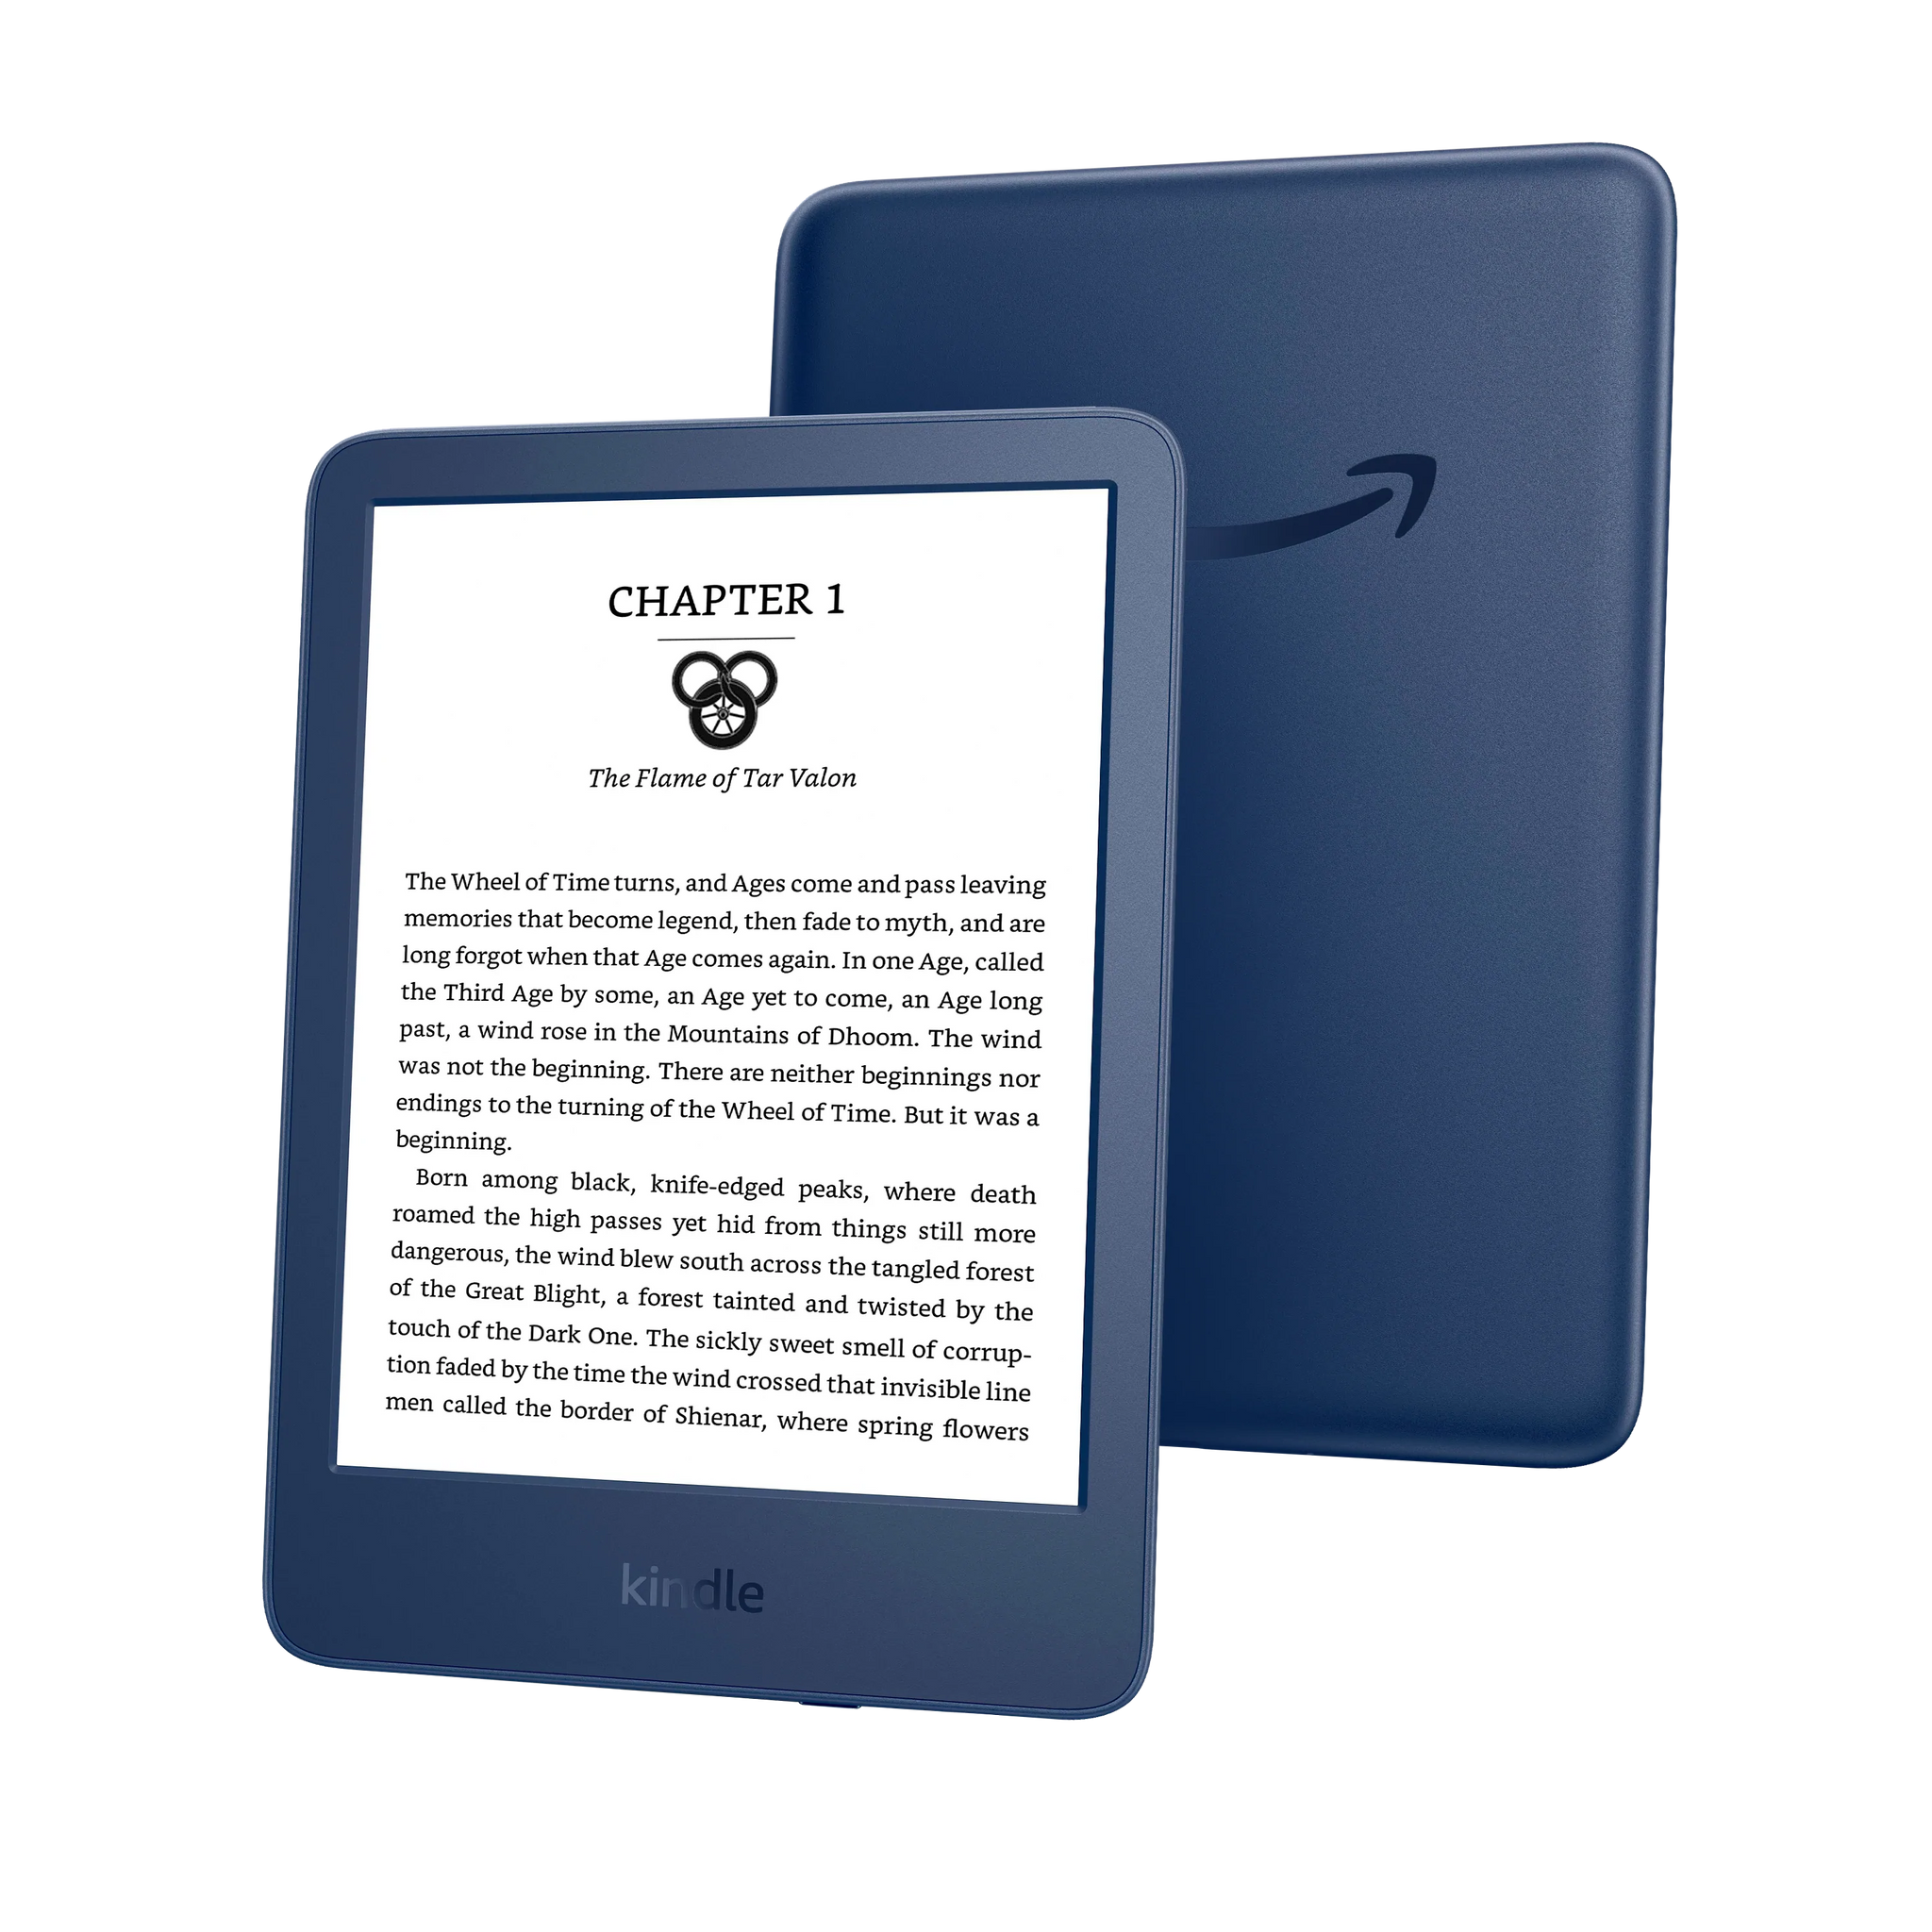 All-new Kindle (2022) 16GB – The lightest and most compact Kindle, now –  gooshopkh